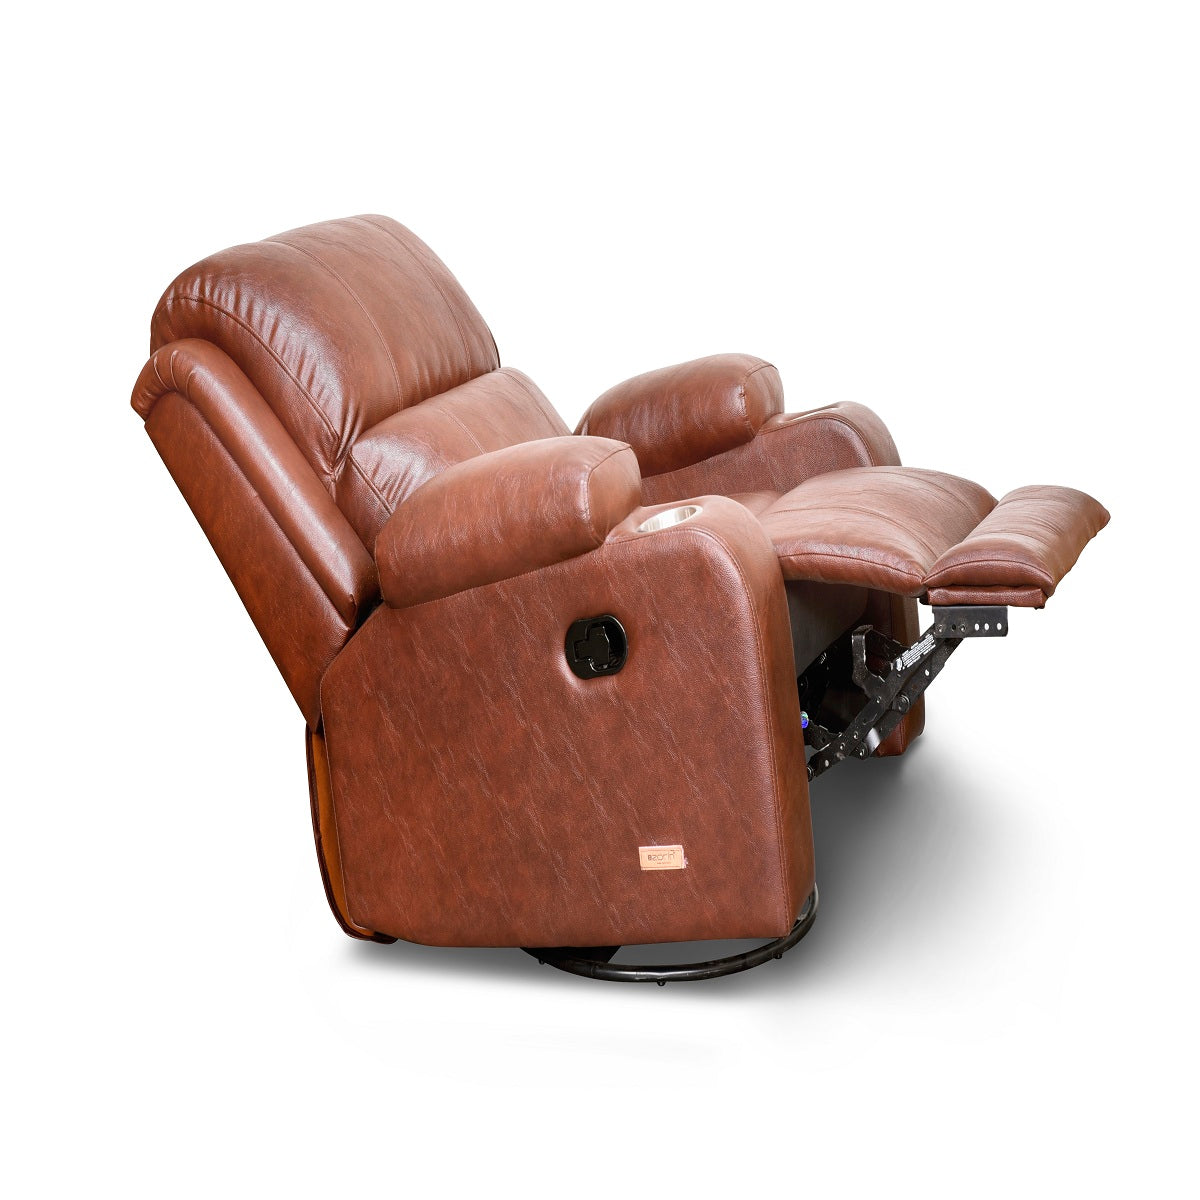 Osaka 1S Recliner by Zorin in Brown Color Zorin